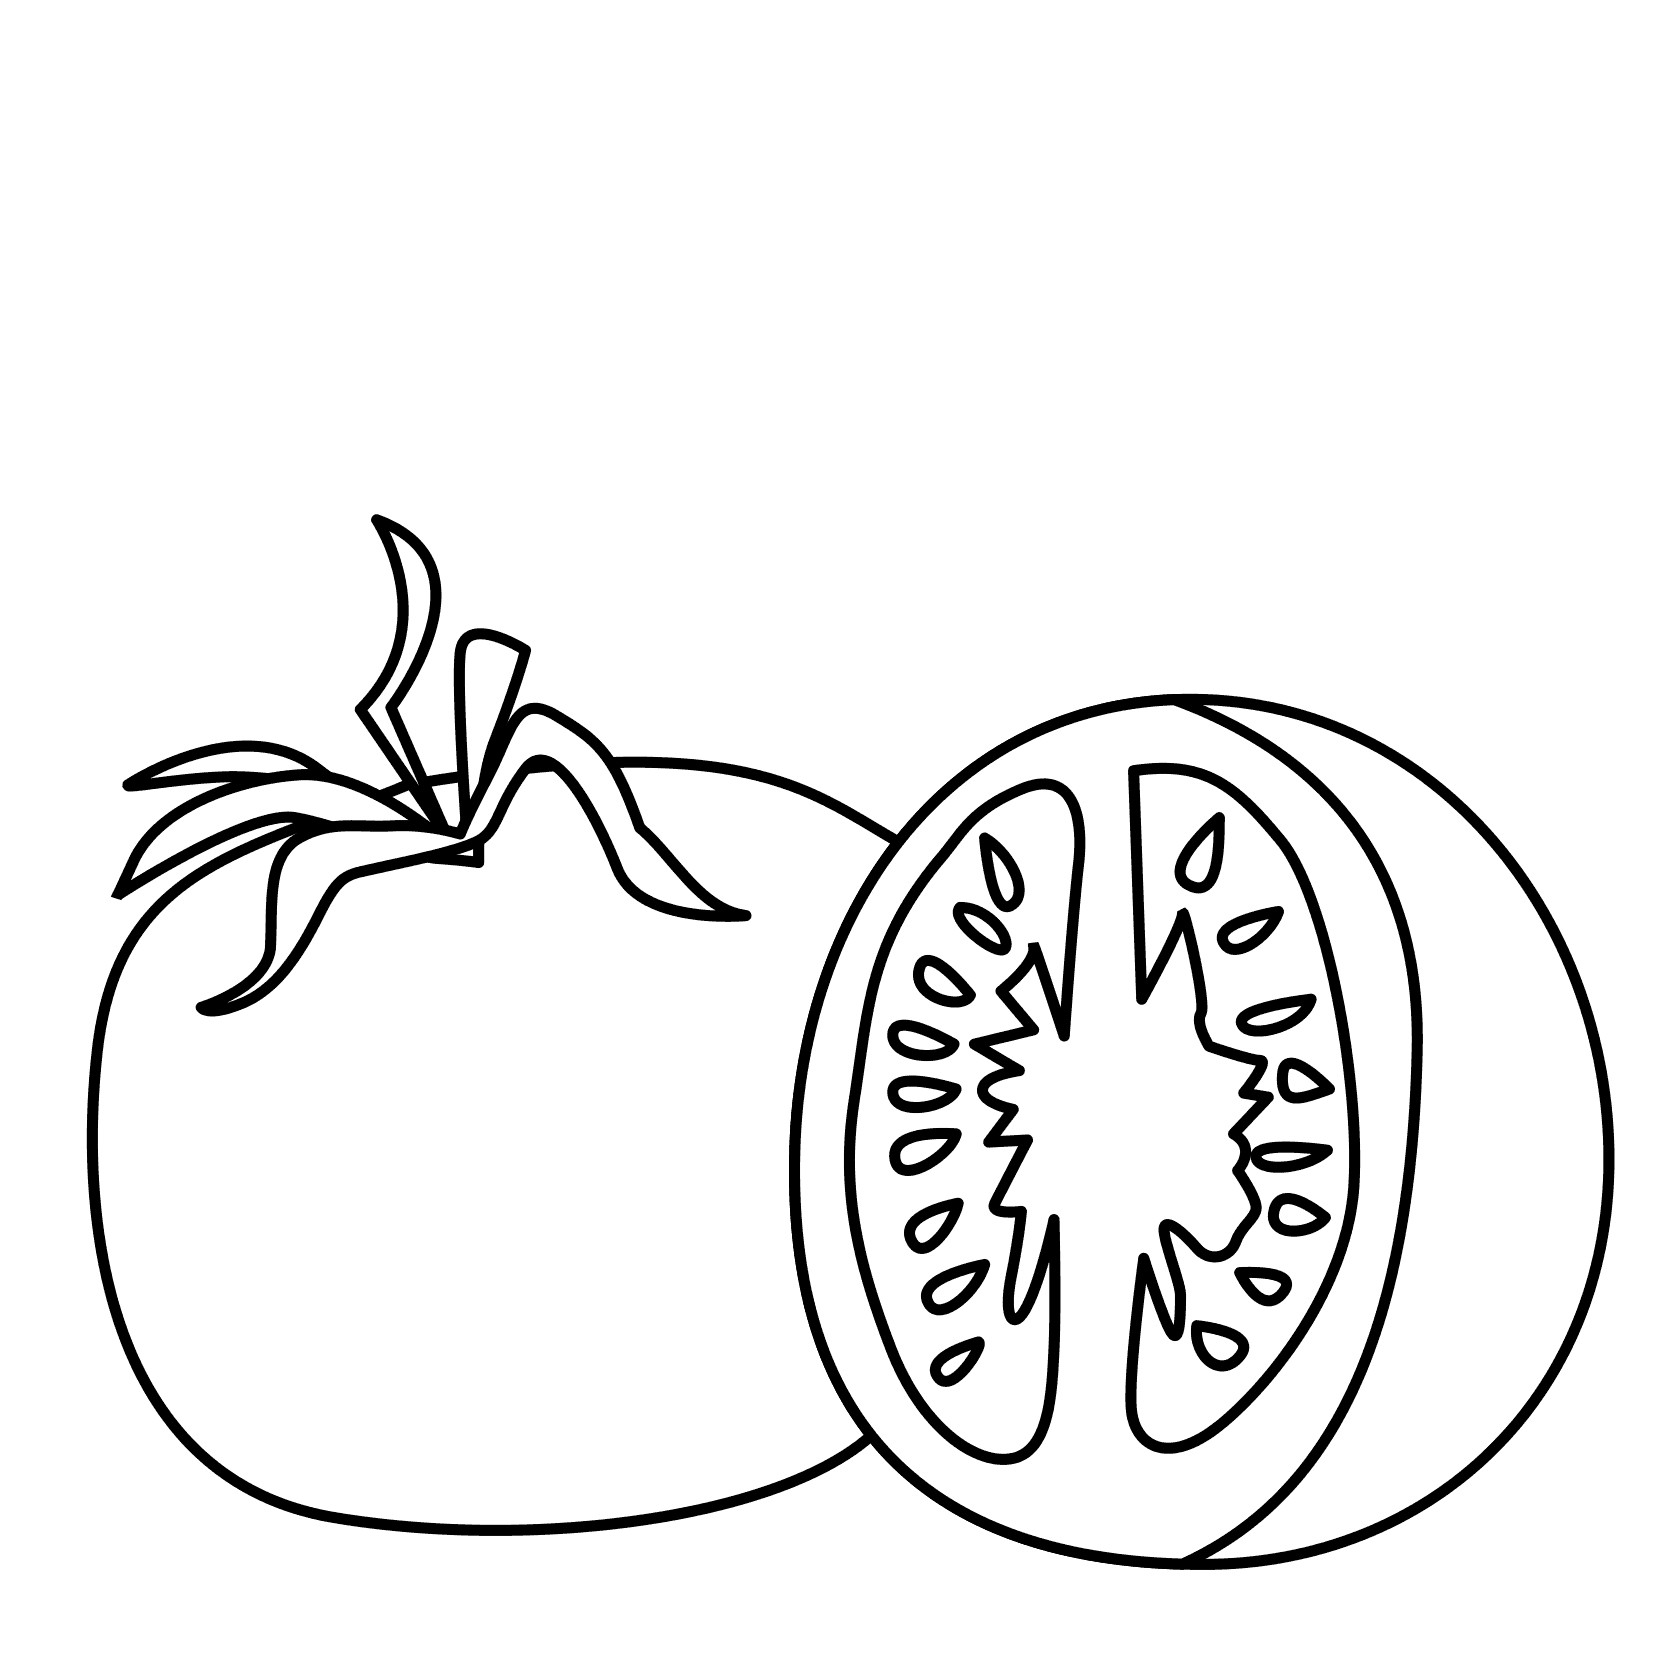 Tomato Coloring Pages - Best Coloring Pages For Kids